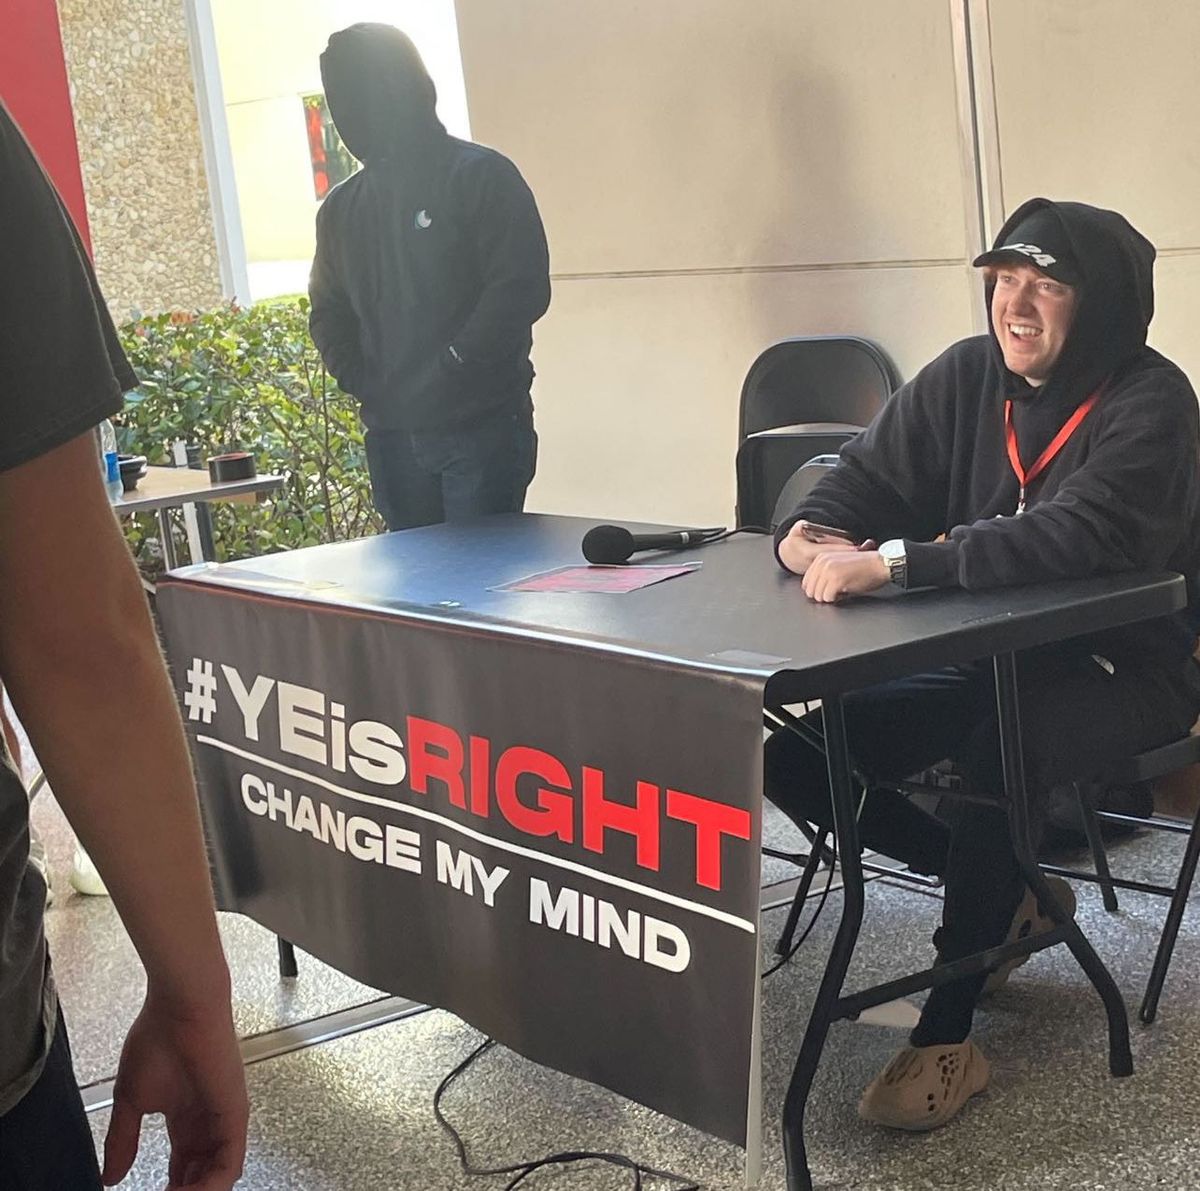 BREAKING: Members Of Congress Condemn “Ye Is Right” Event At Public Florida University